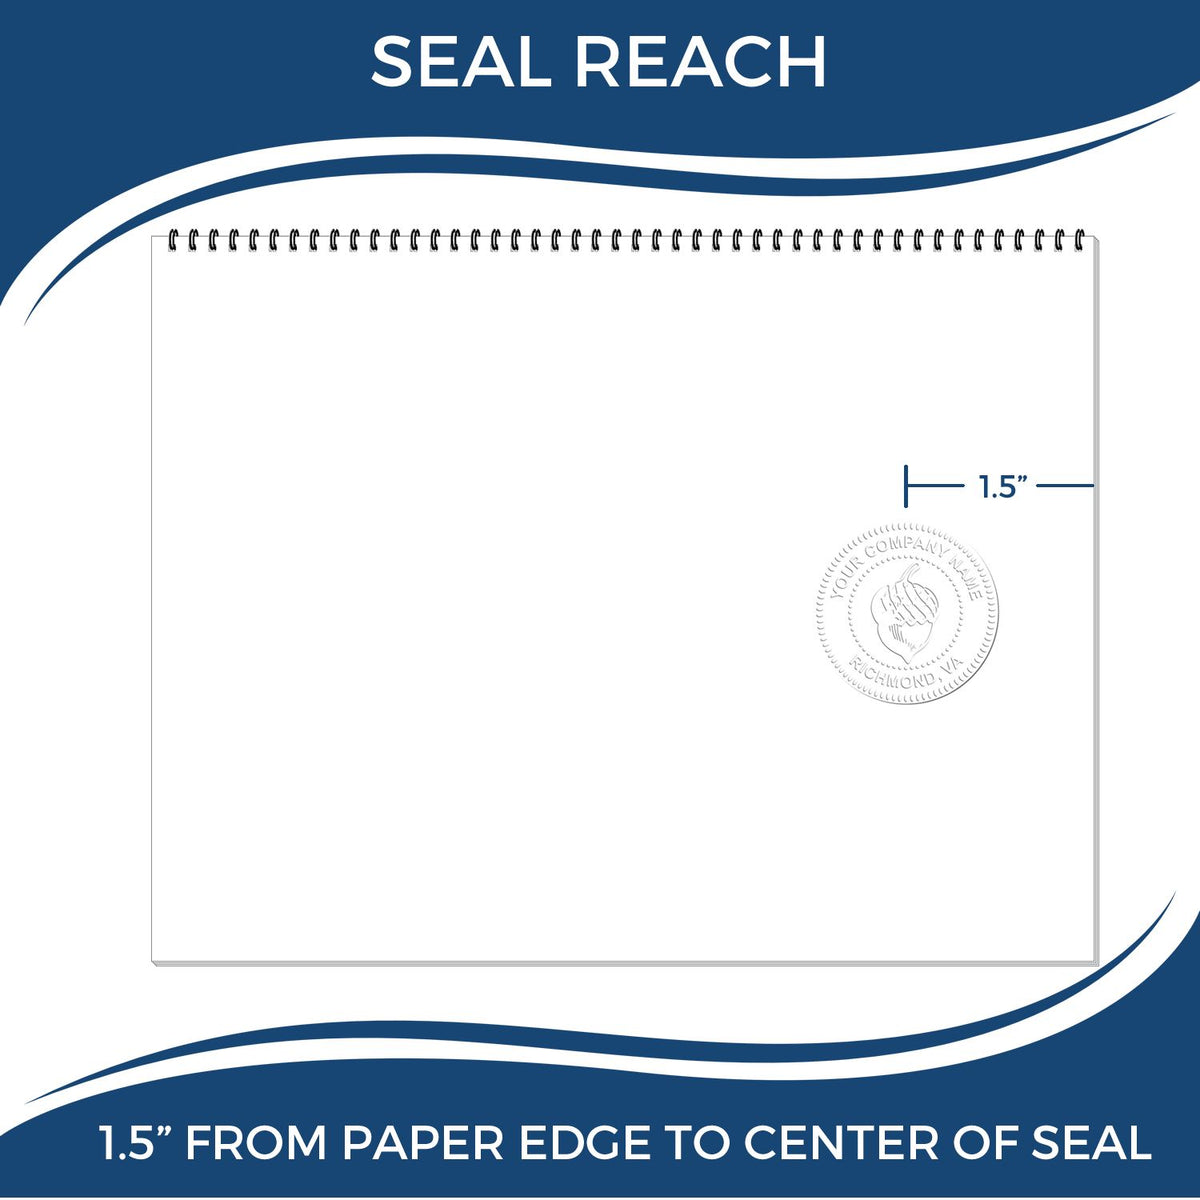 An infographic showing the seal reach which is represented by a ruler and a miniature seal image of the Idaho Geologist Desk Seal